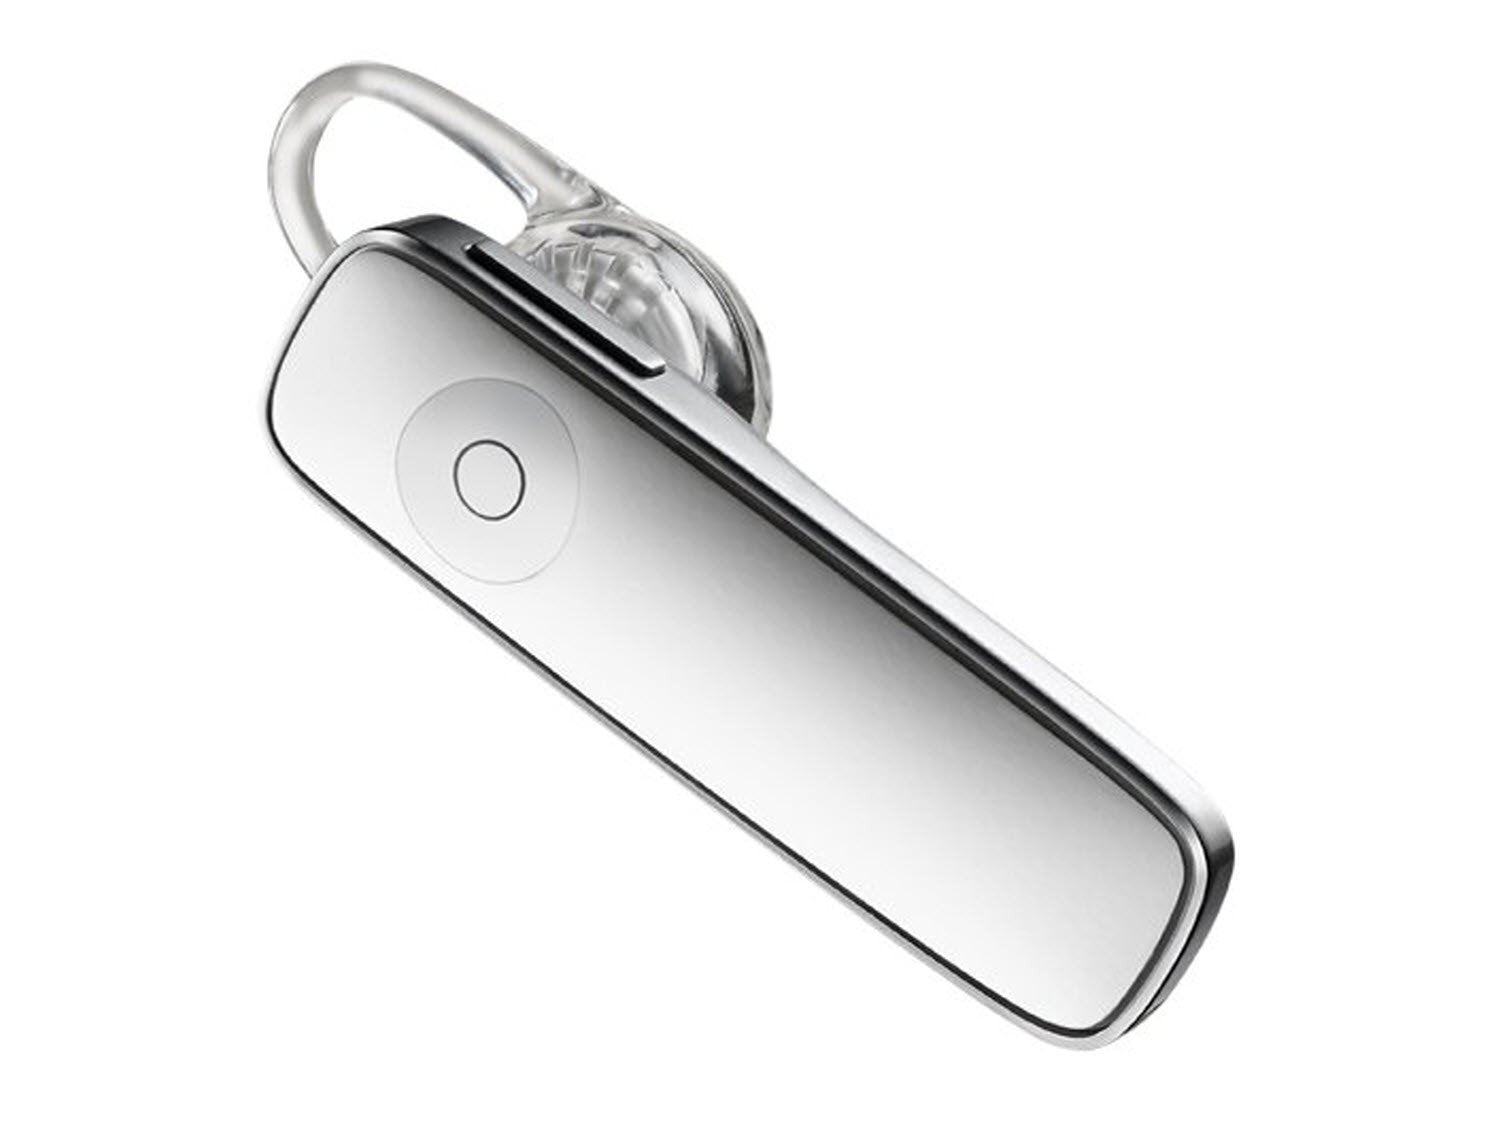 Plantronics M165 Marque 2 Ultralight Bluetooth Headset Compatible with Smartphones - White